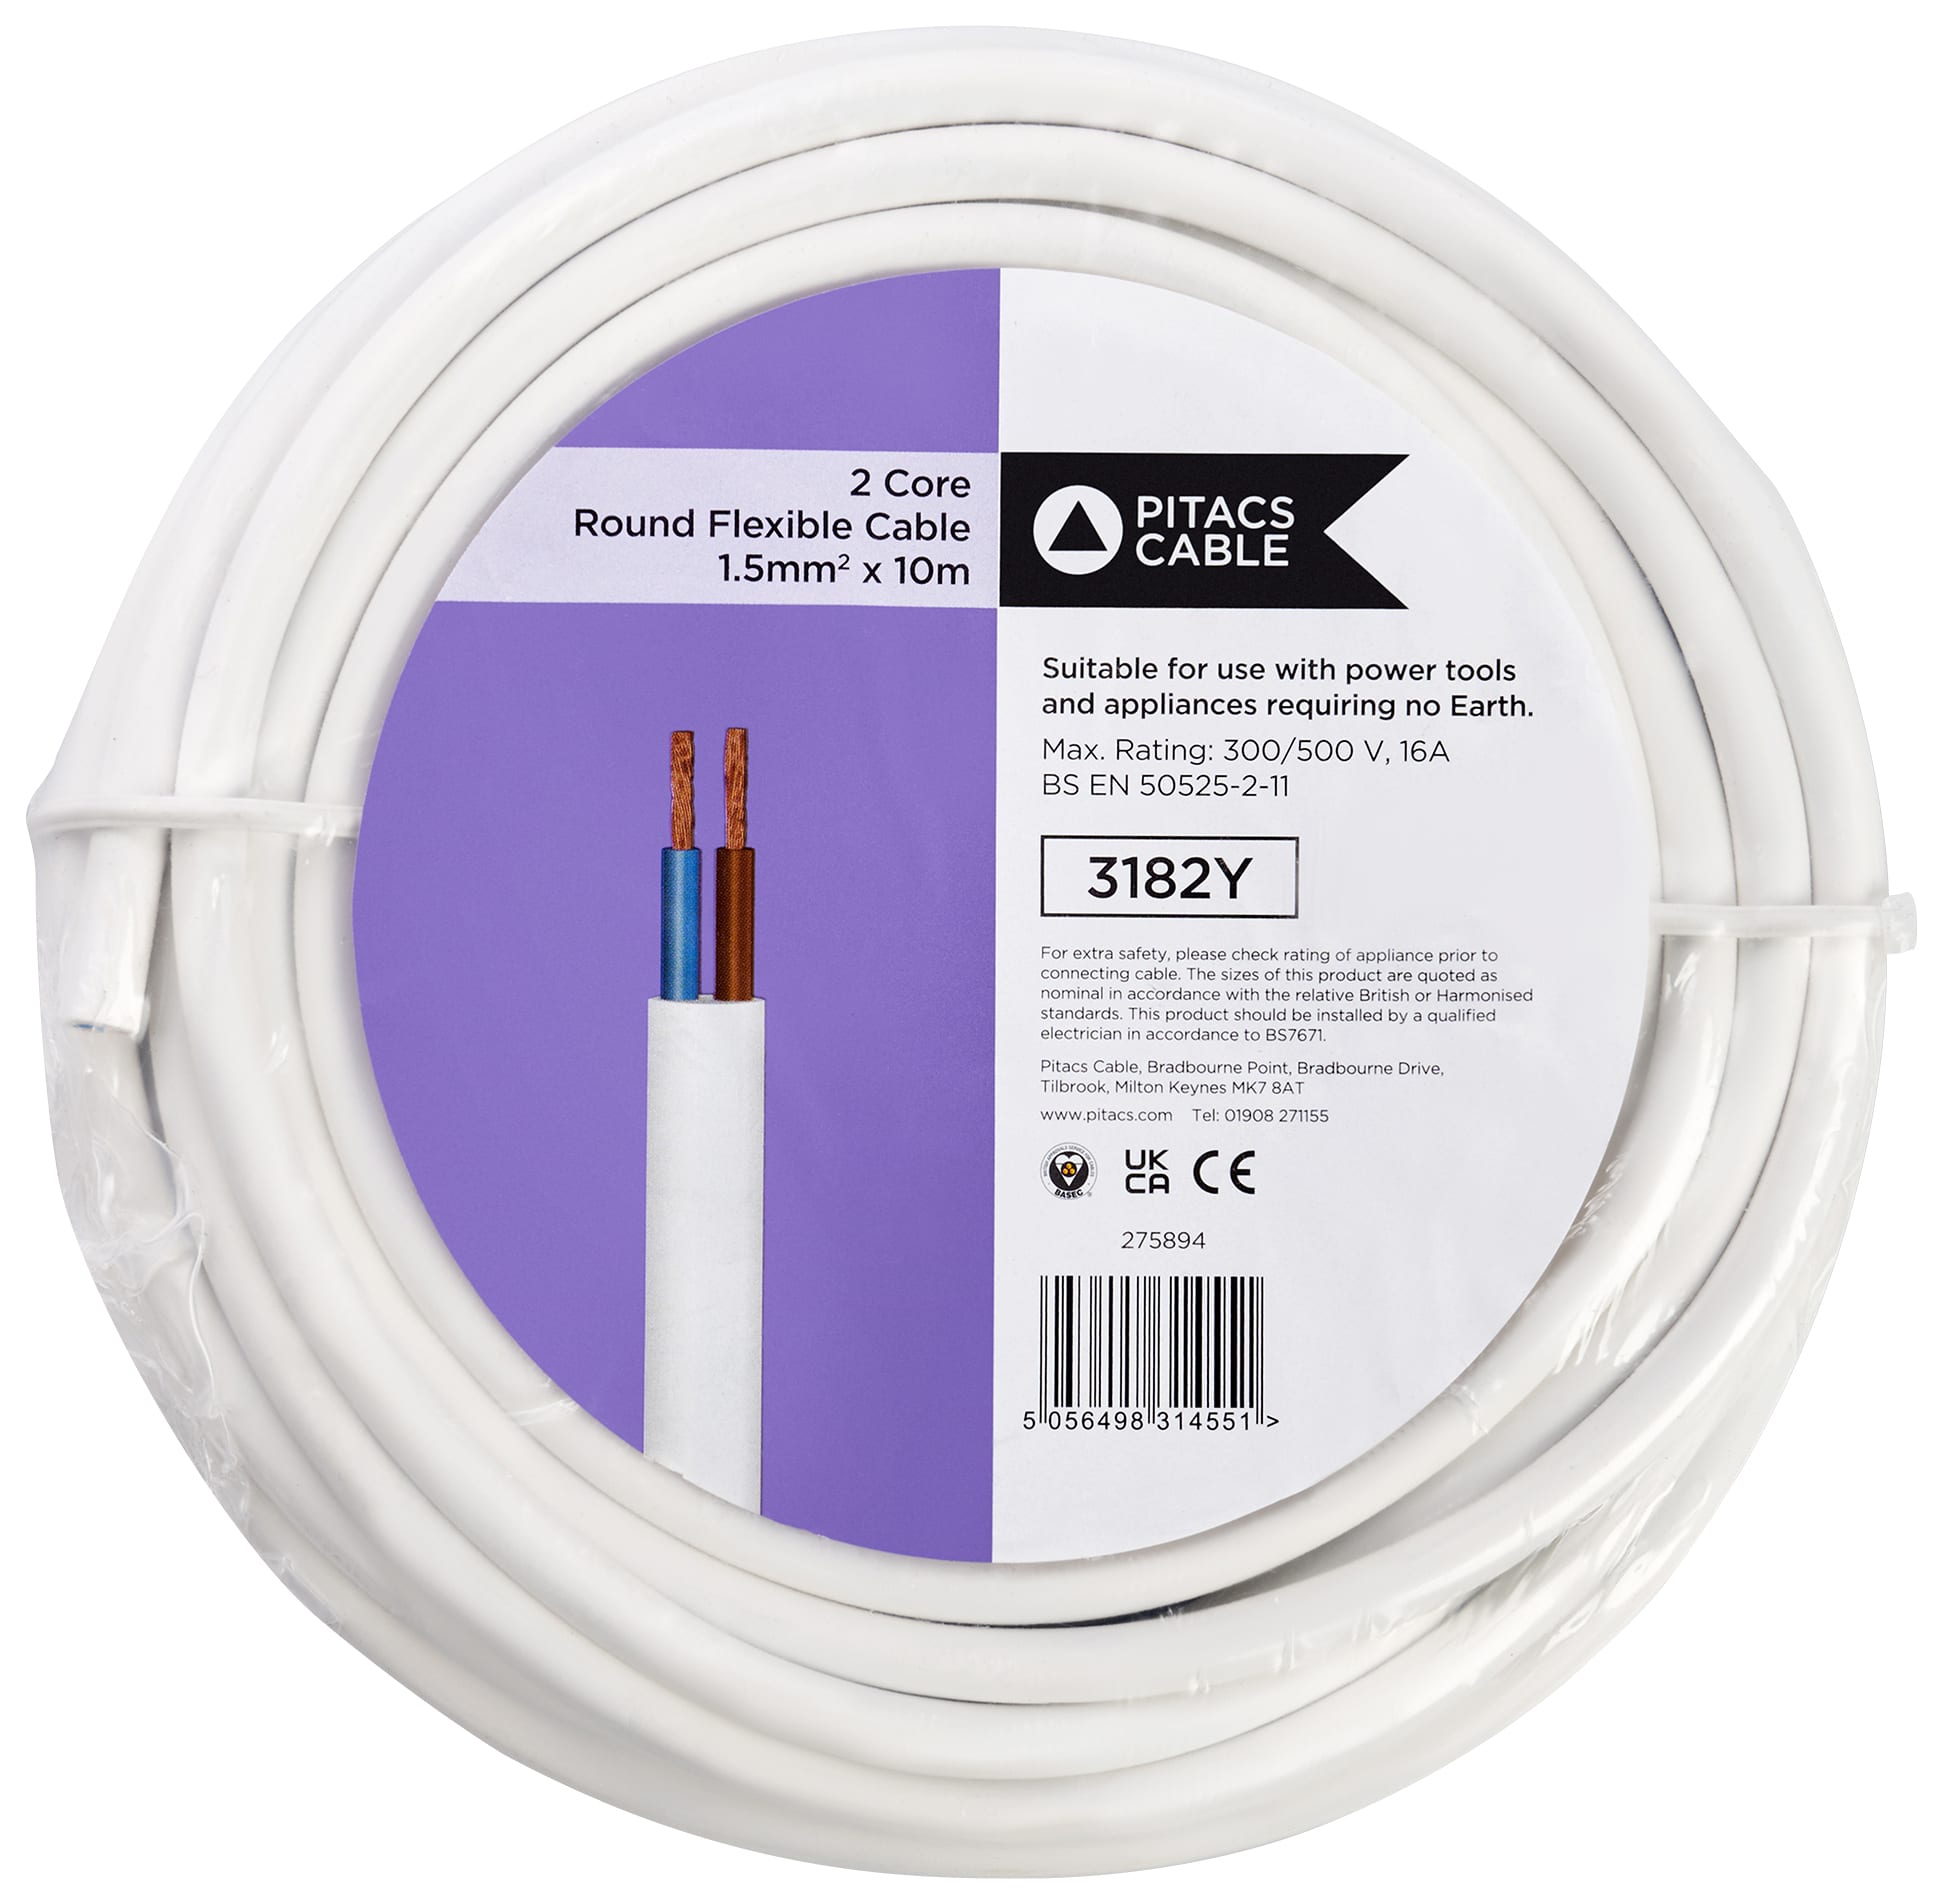 2 Core 3182Y White Round Flexible Cable -